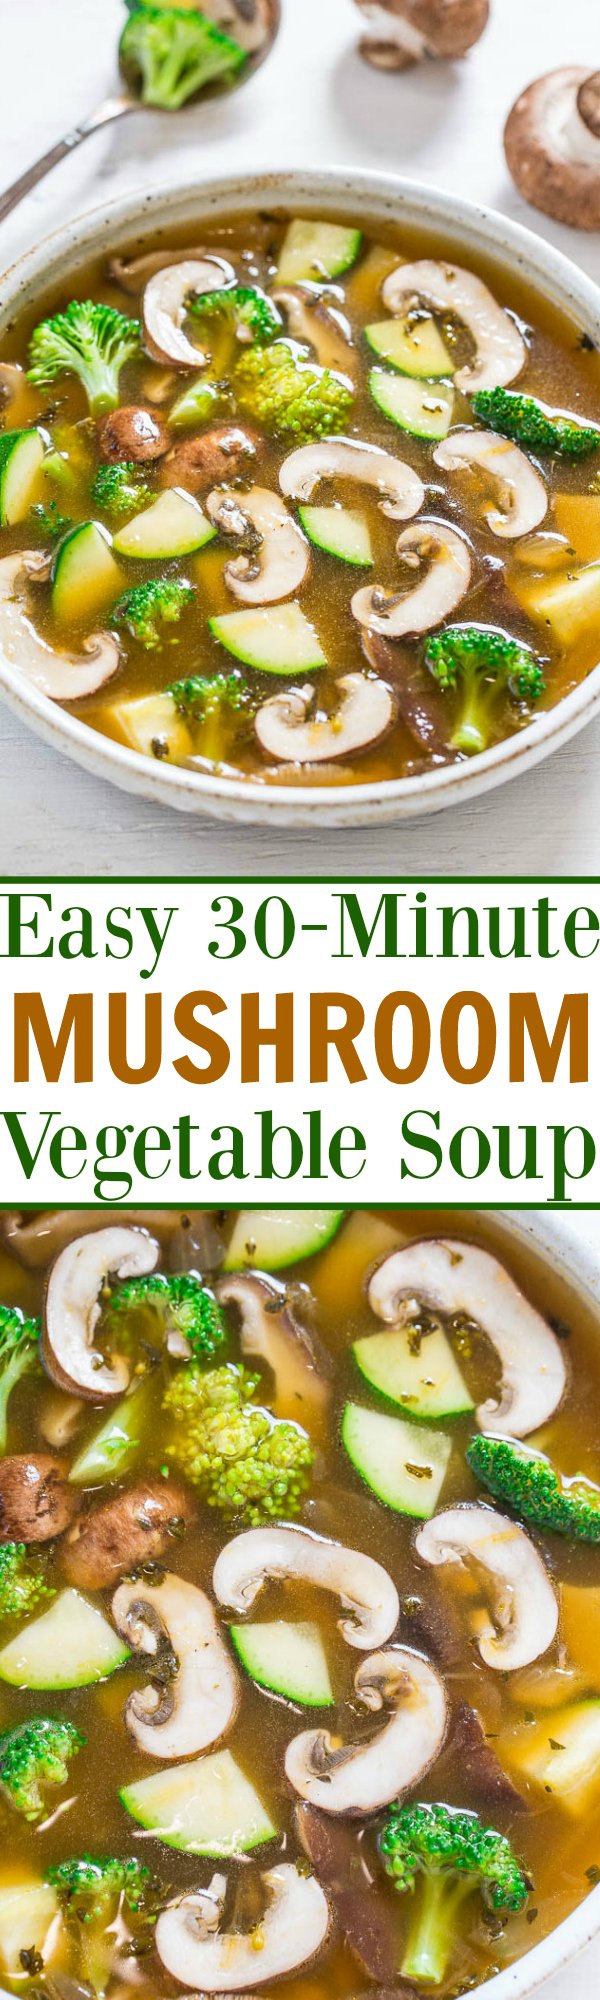 Easy 30-Minute Vegetable and Mushroom Soup — Healthy, light yet satisfying, and full of rich savory flavor!! An Asian-inspired twist on vegetable soup that you'll LOVE!!